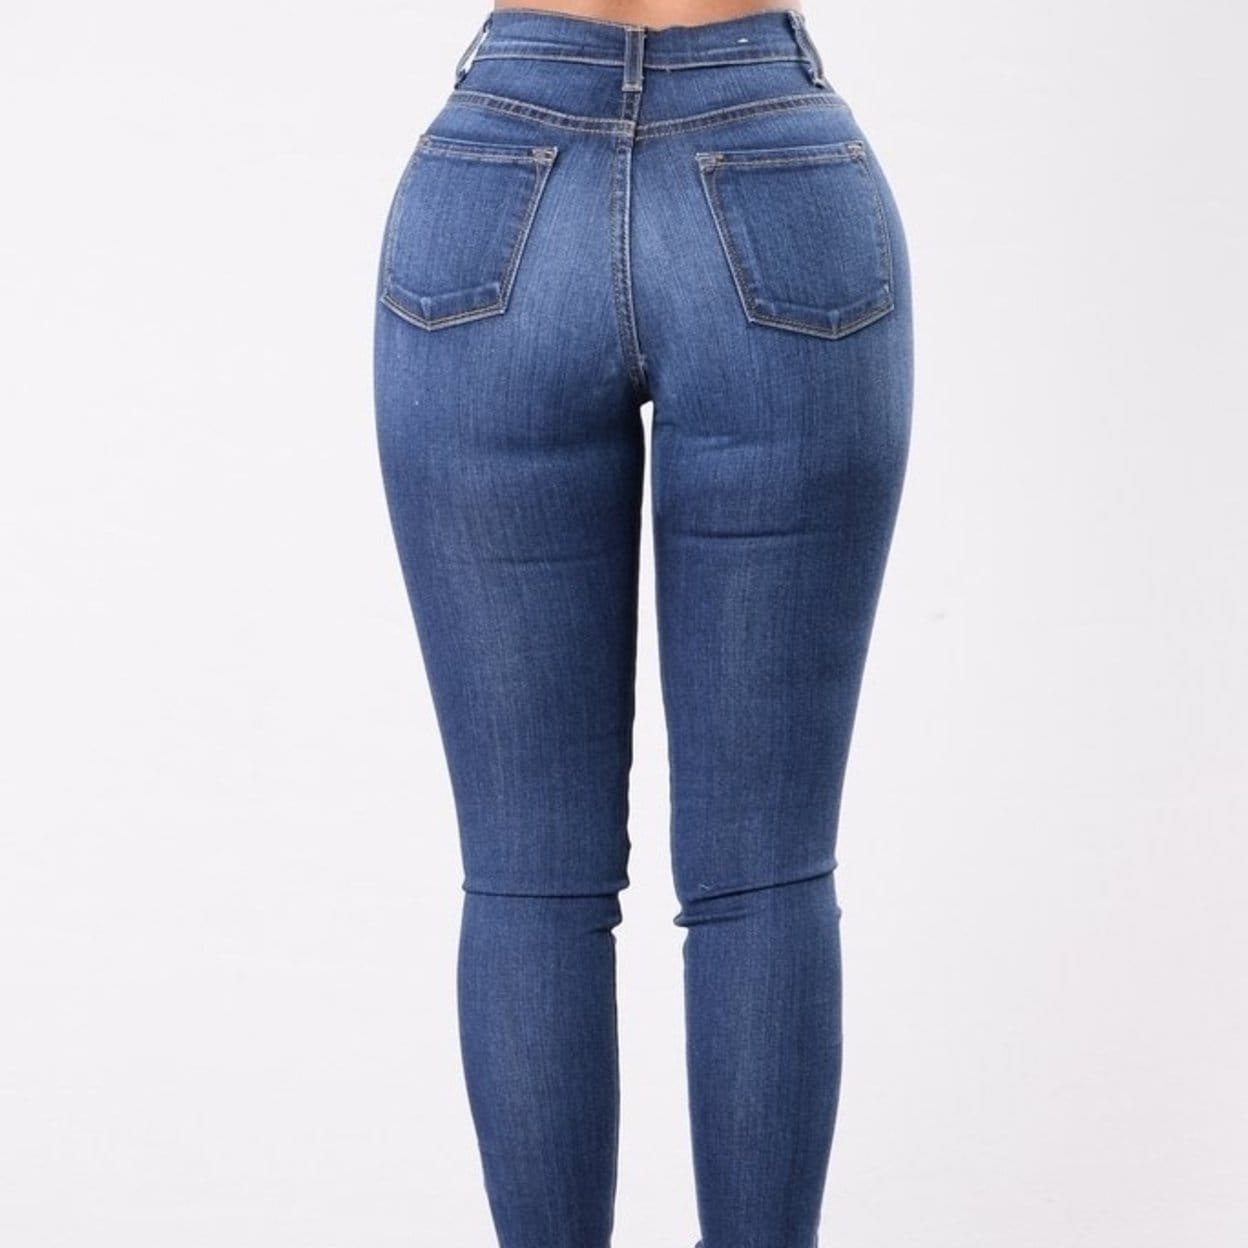 ripped stretch skinny jeans womens